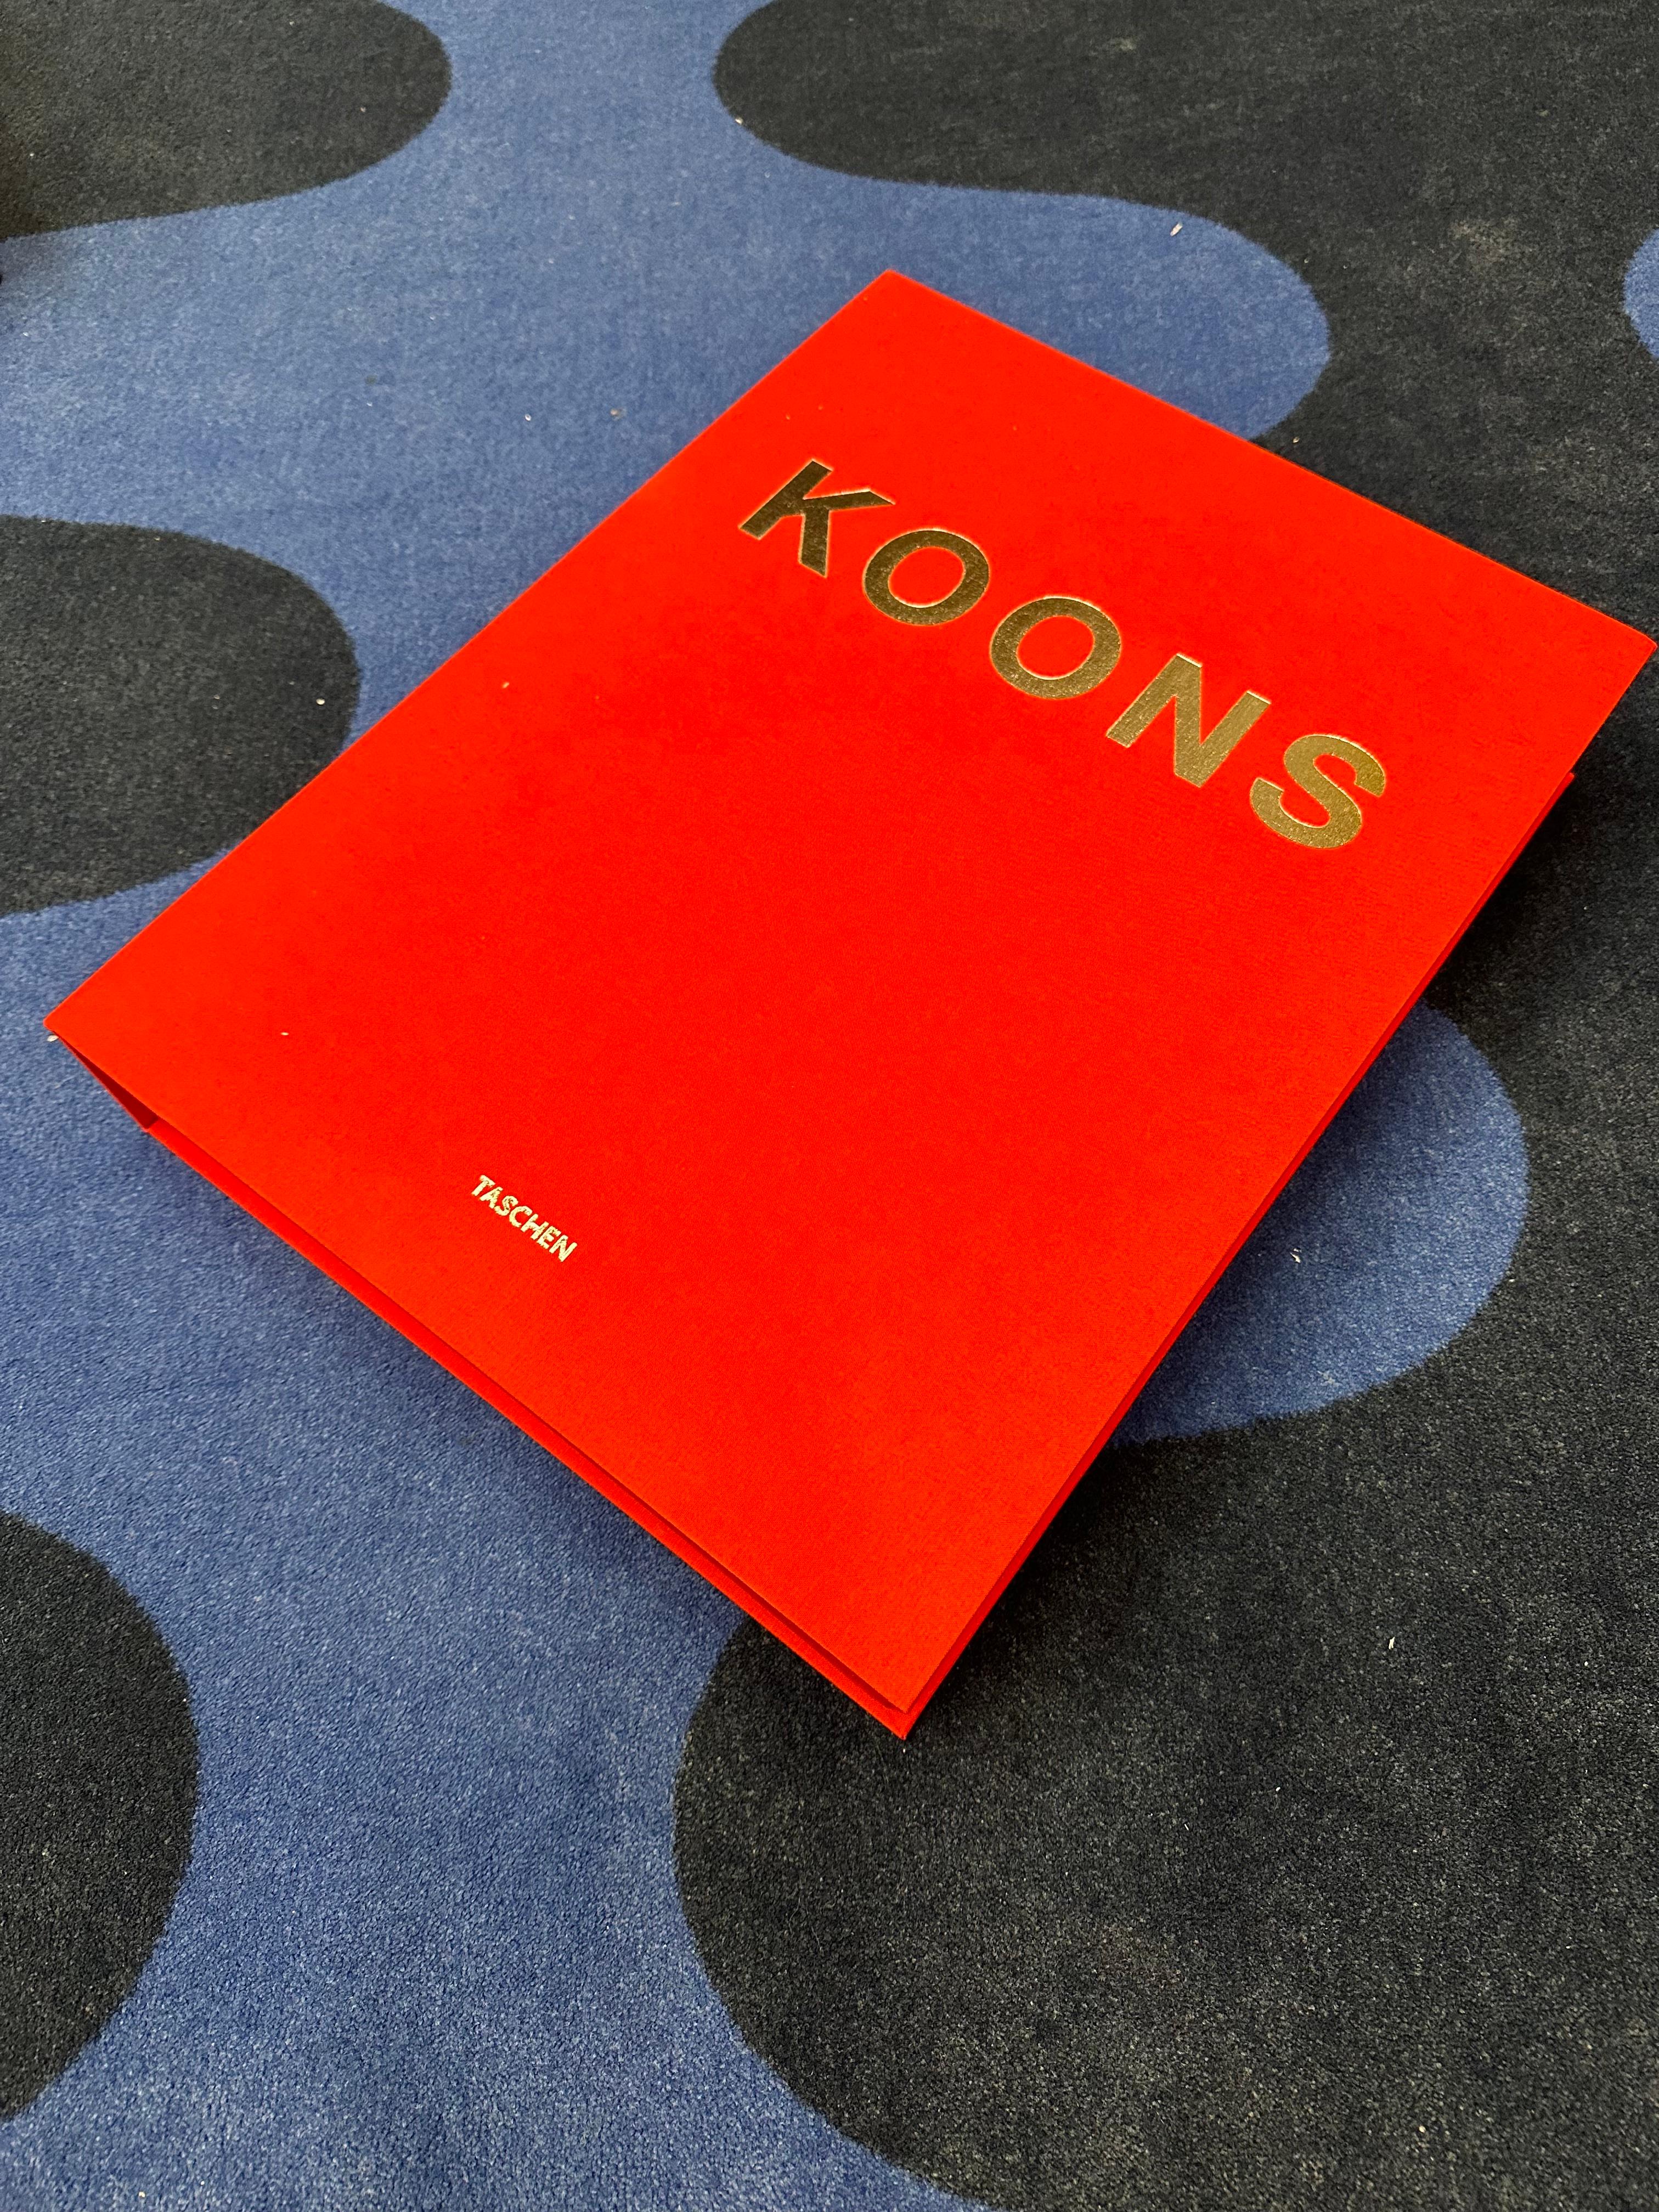 American Jeff Koons Signed, Limited Edition Book, Taschen, Large Scale in Clamshell Box For Sale